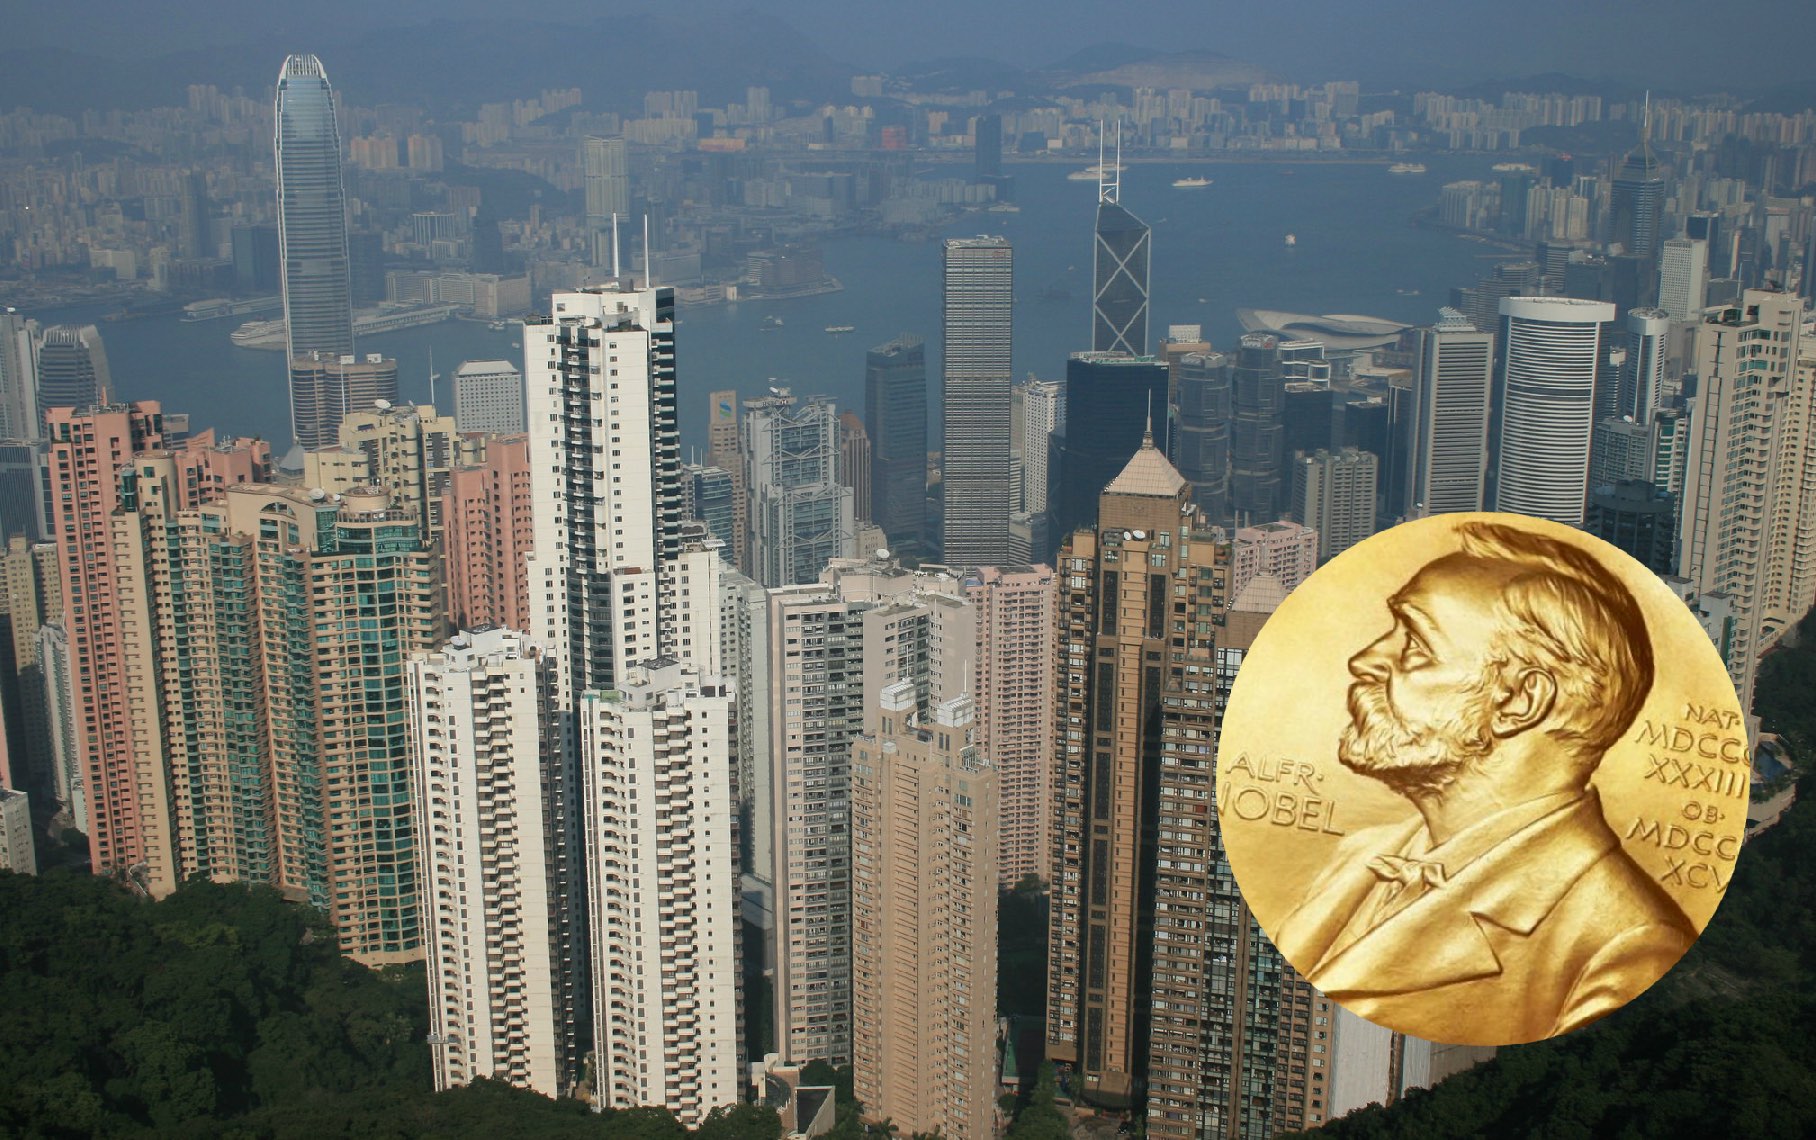 A view of Hong Kong, the people of which have just been nominated for the Nobel Peace Prize. Photos via Flickr/Nobel.